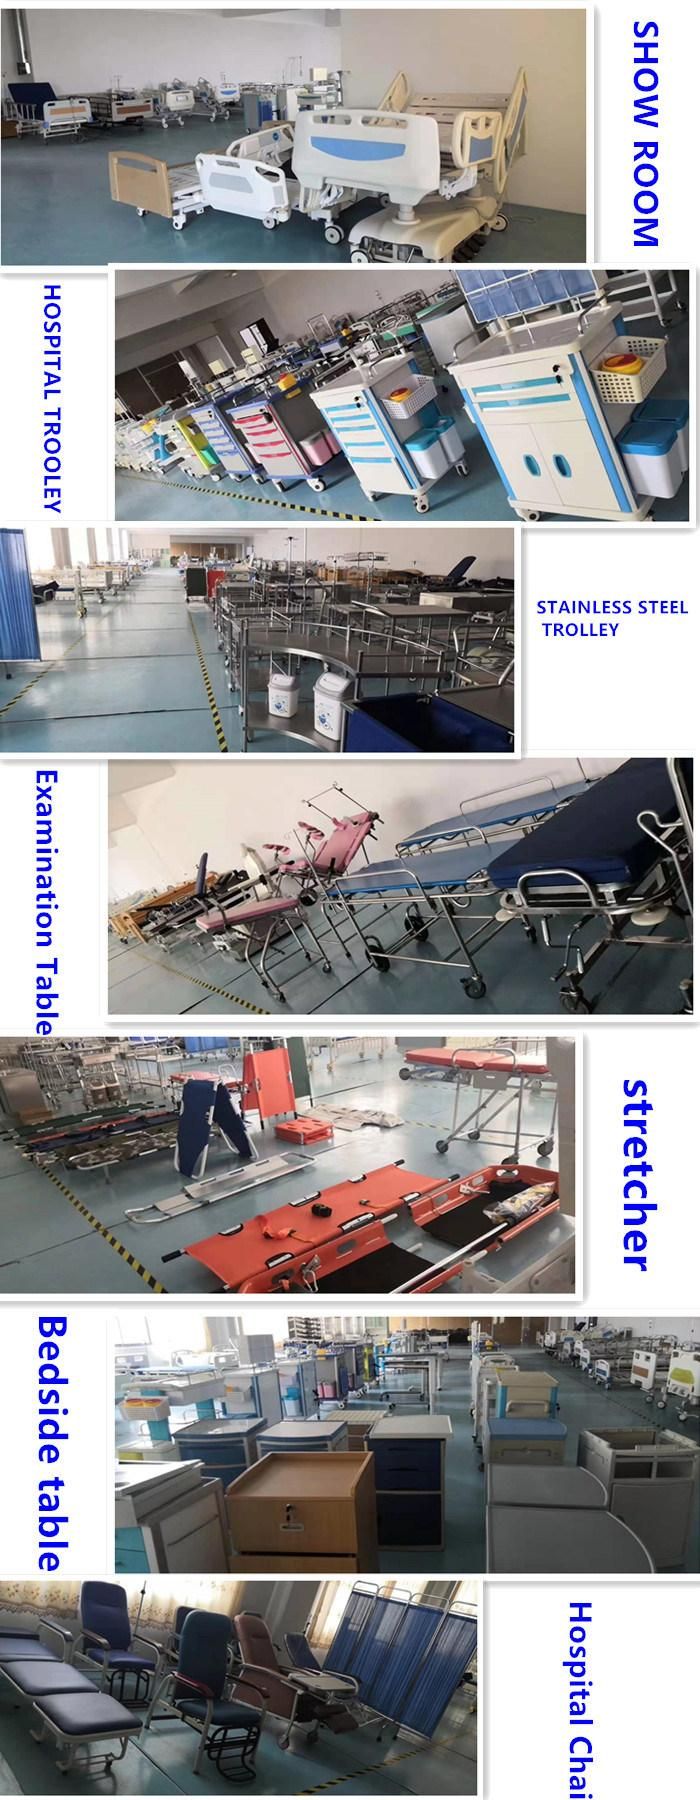 Factory Price Hospital Examination Table Obstetric/Gynecological Delivery Bed